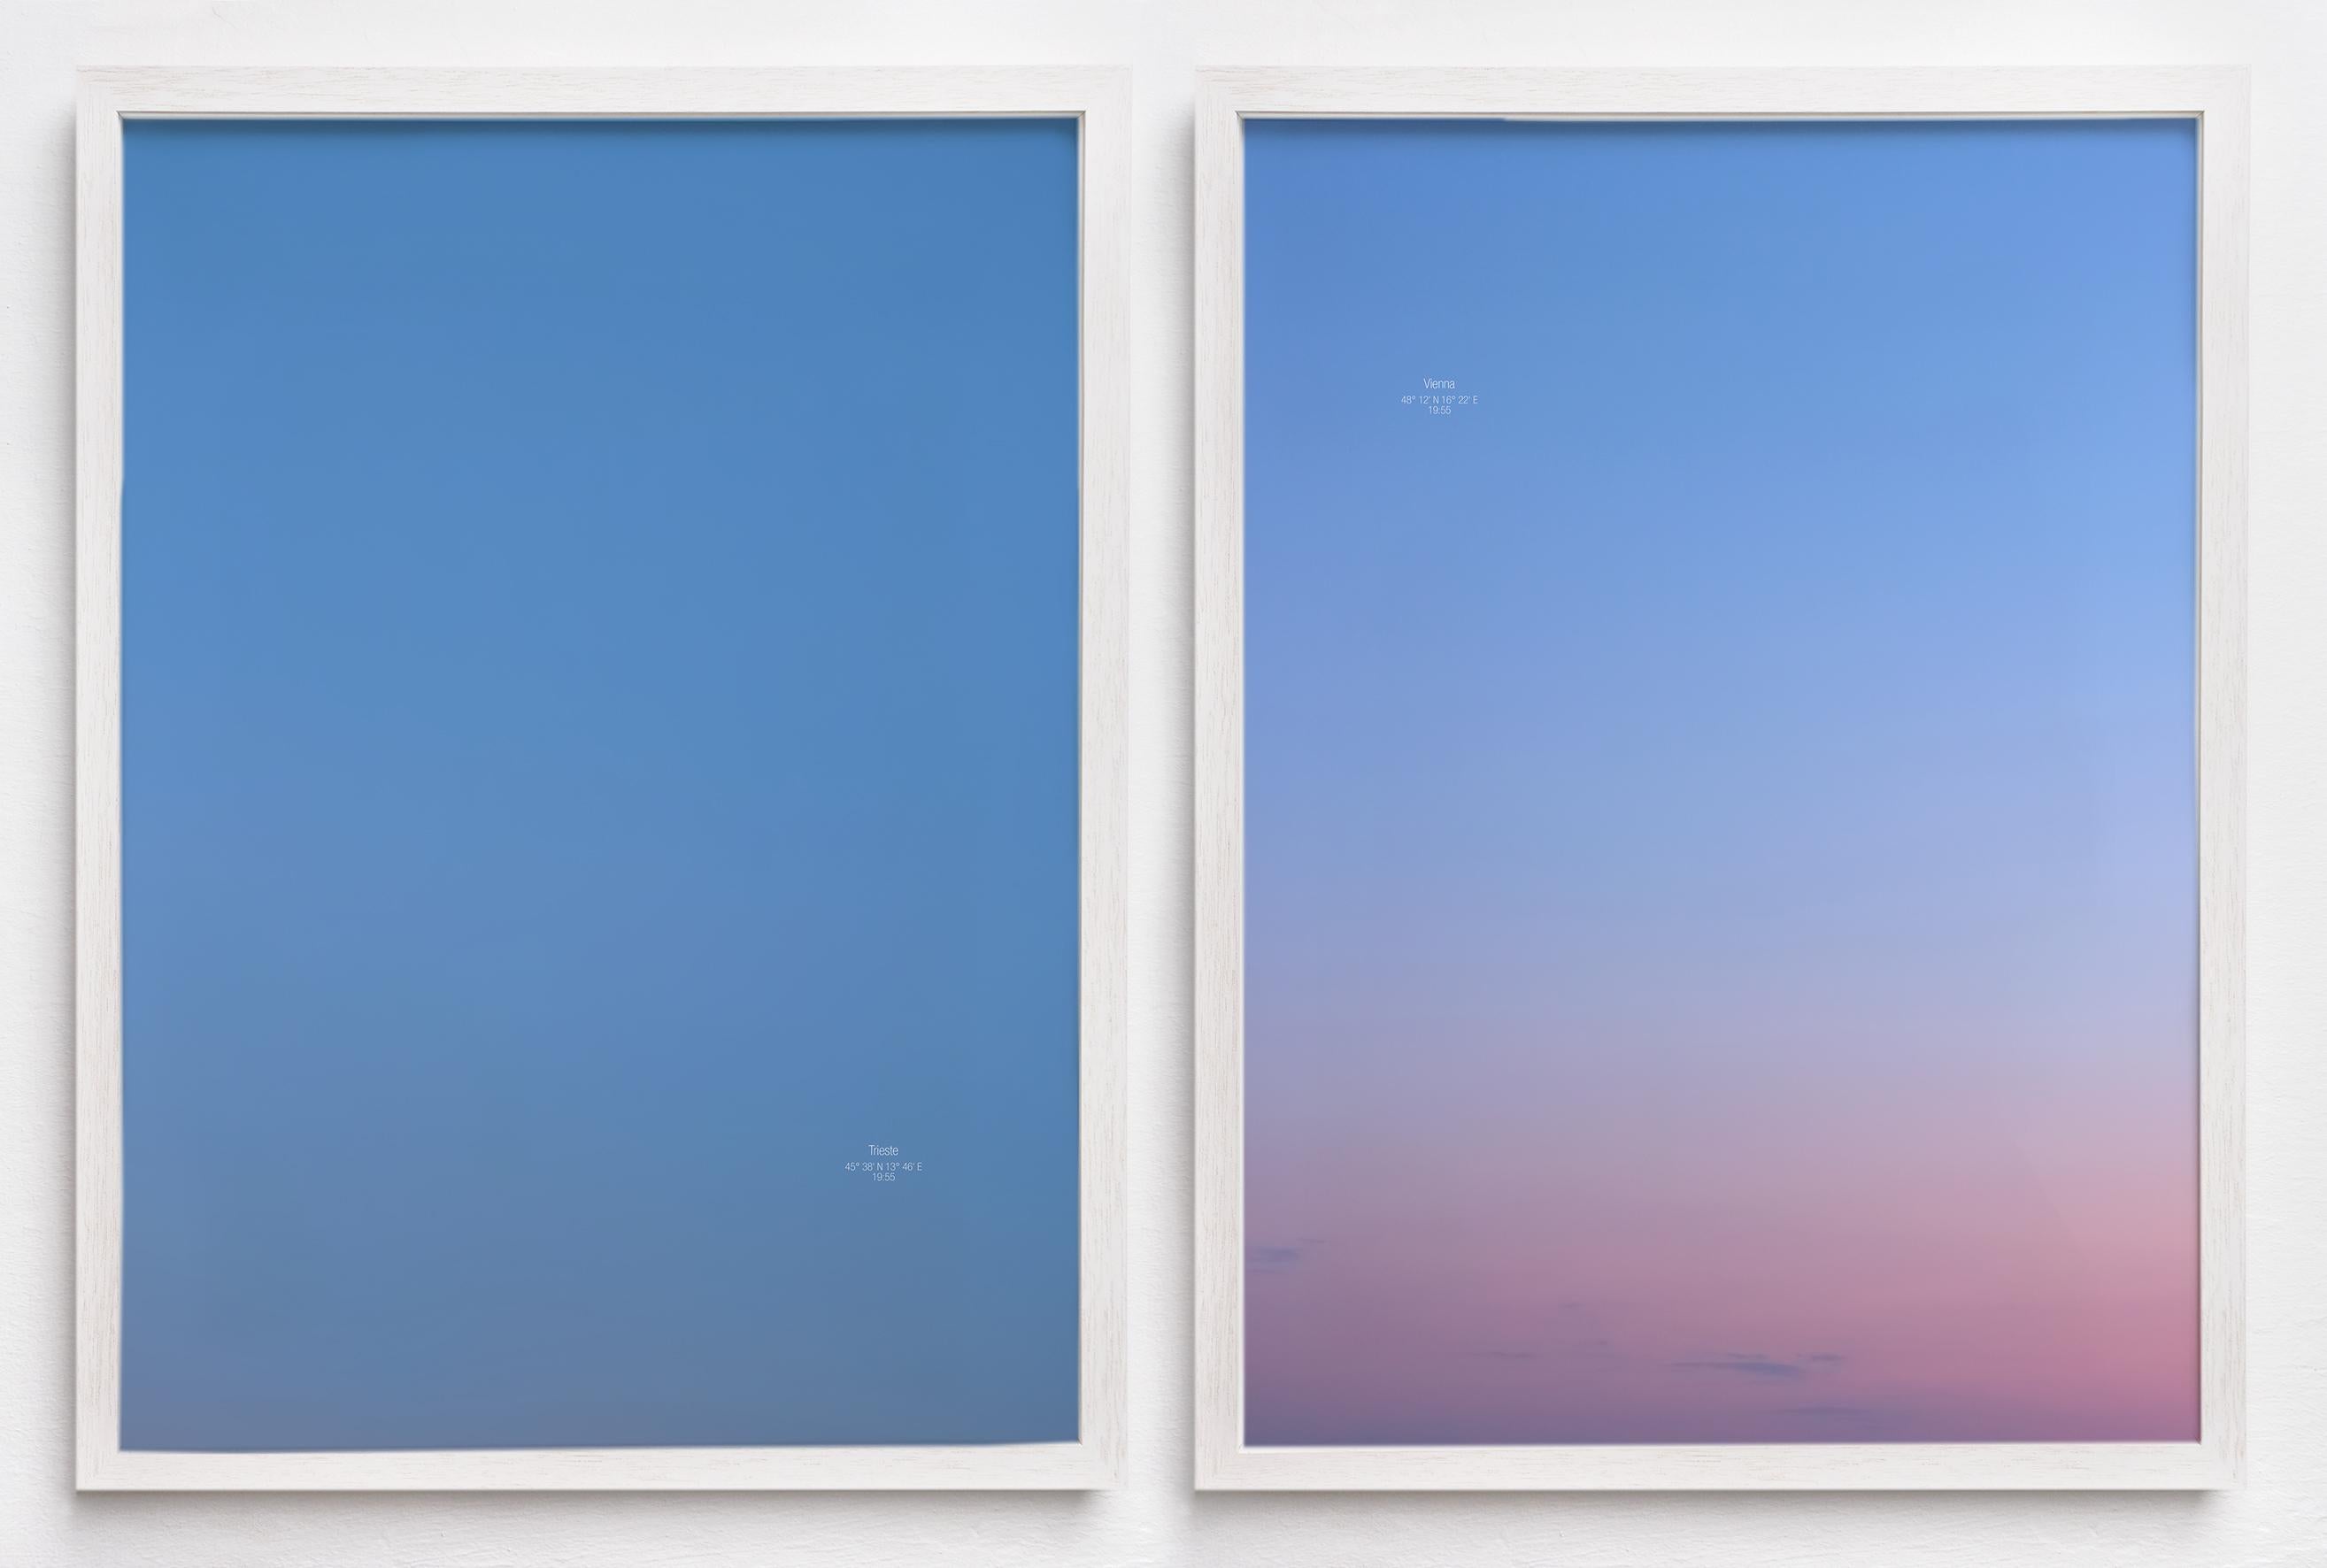 On the other Side of the Sky - 21st Century Abstract Color Photography Sunset
Trieste / Vienna, 19:55
Diptych, 2 pieces, 70 x 50 cm each
Edition 1/5+2 AP
Prints are unframed and come with labels signed by the artist.

When we look at the sky, we see